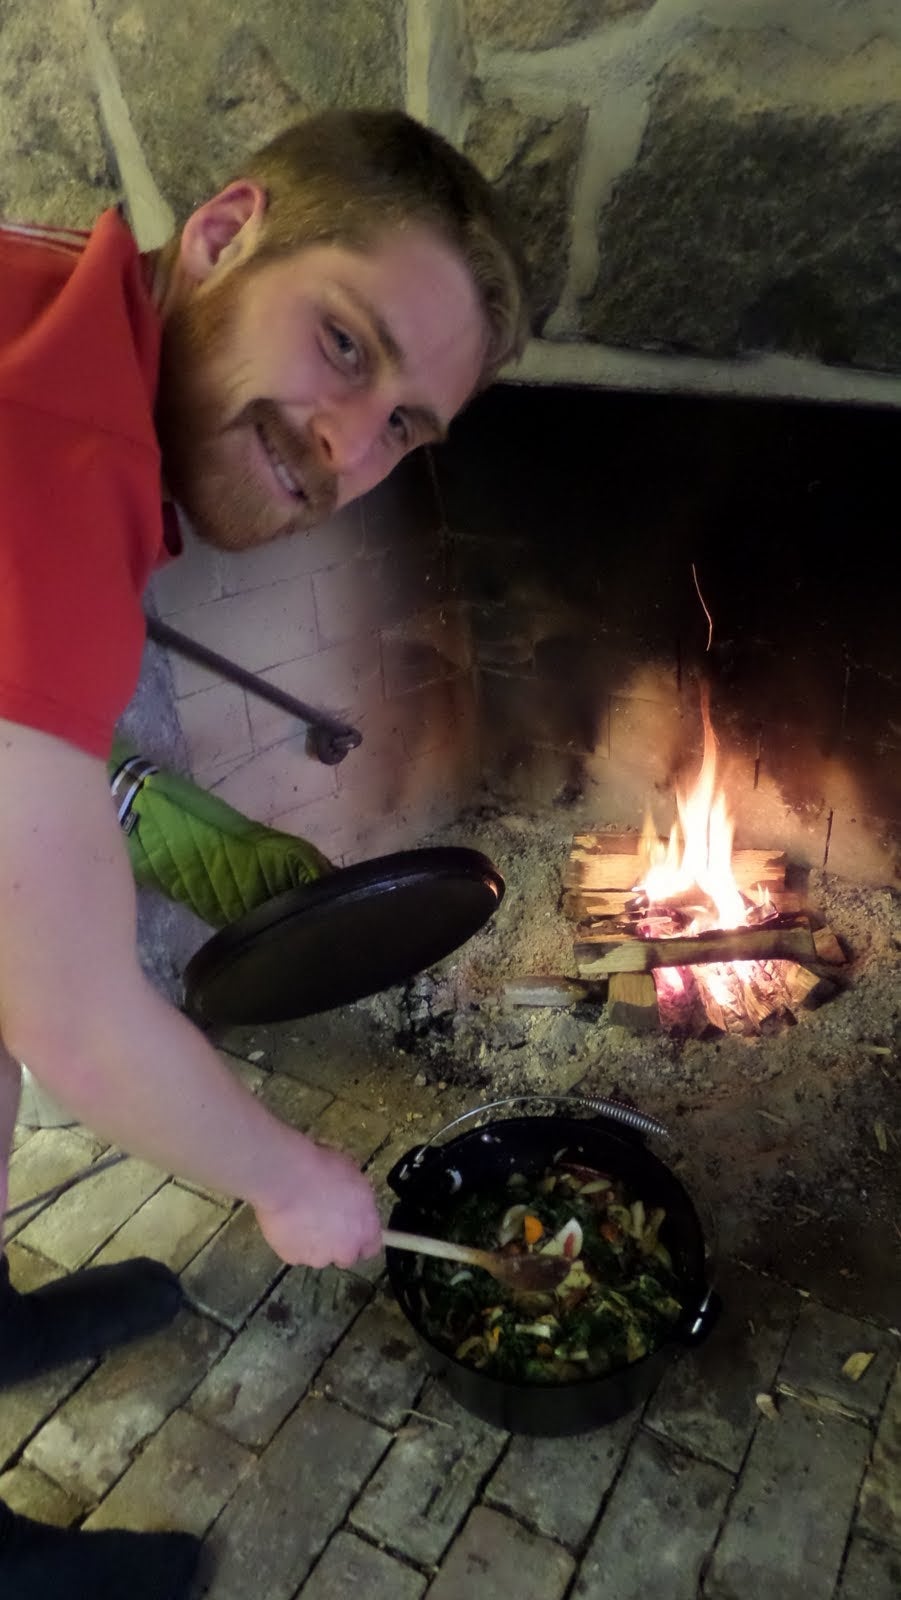 Josh stirs a cast iron pot with vegetables, cooking in the lit stone fireplace.